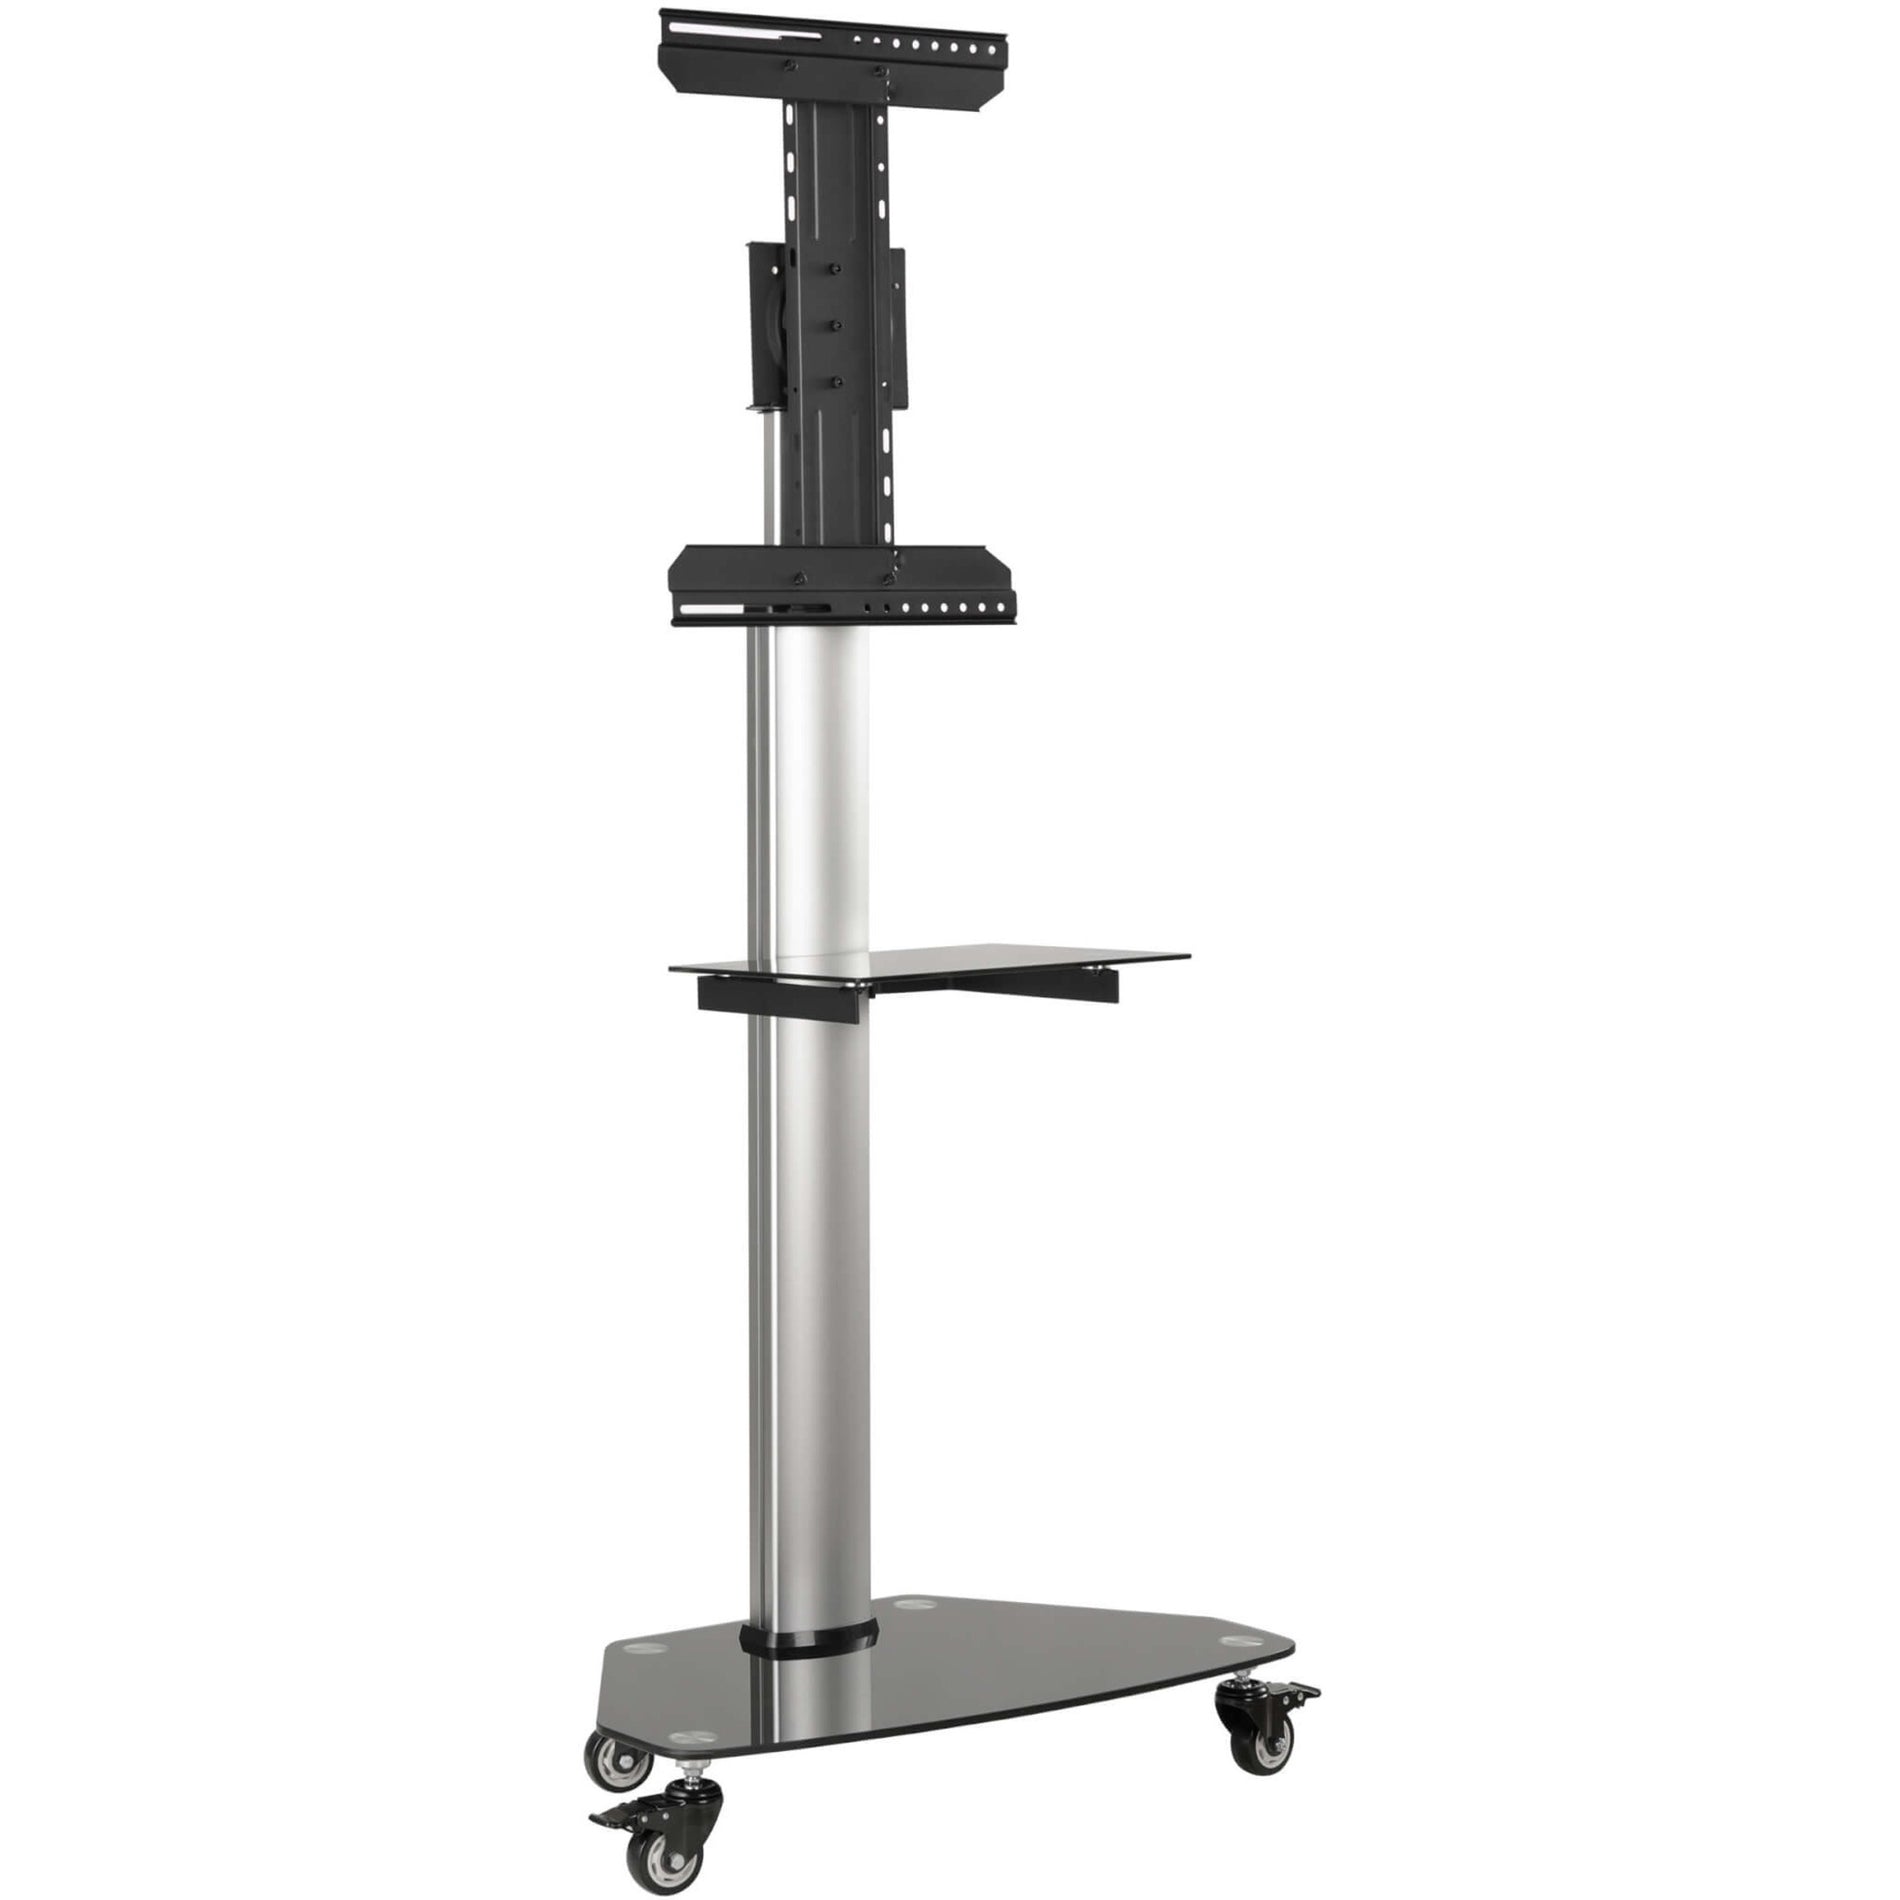 Tripp Lite DMCS3770SG75 Premier Rolling TV Cart, Durable, Adjustable Height, 37-70in, 175 lb Capacity